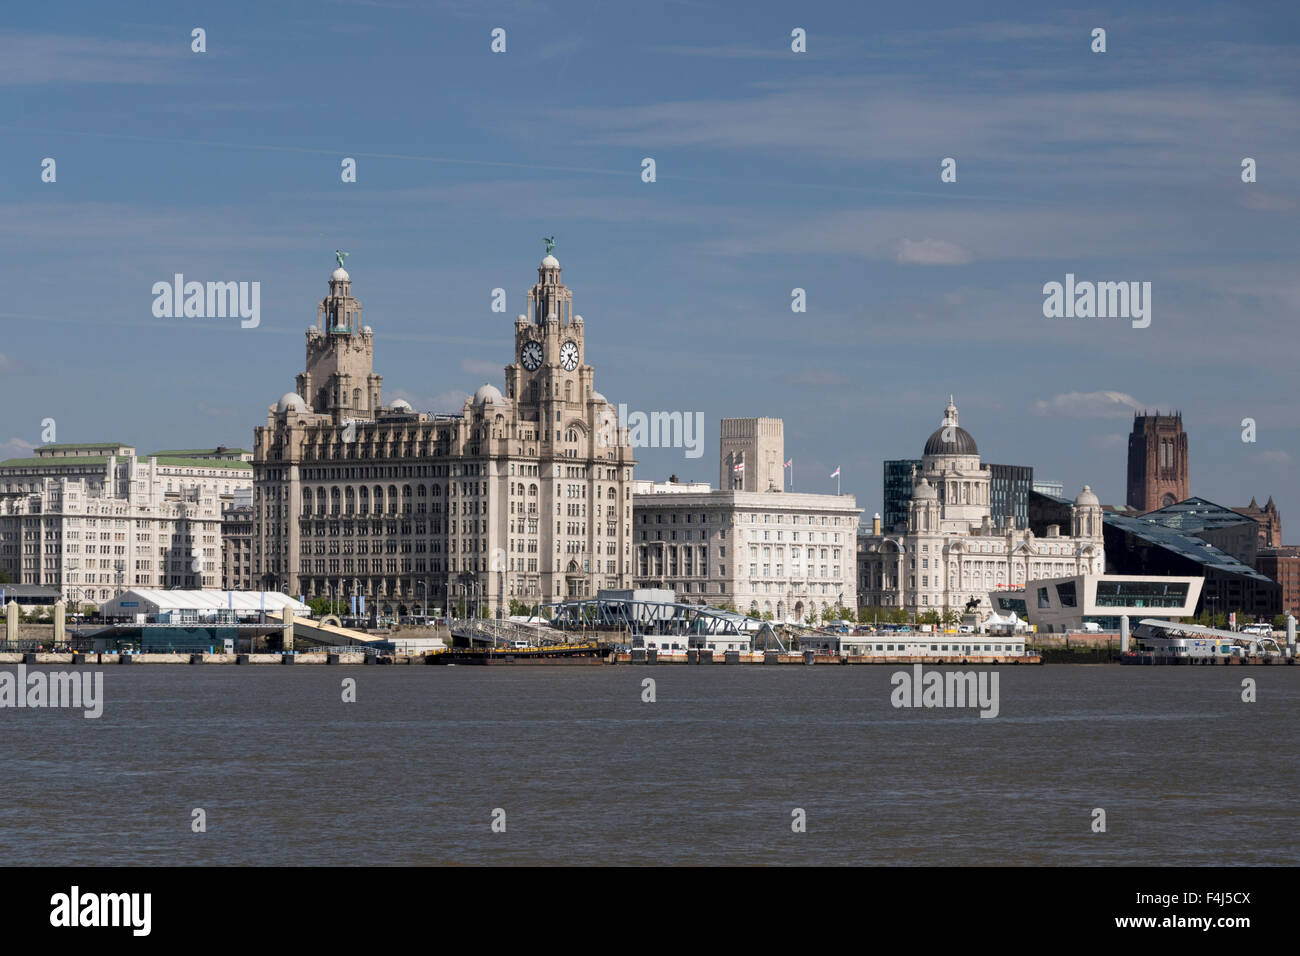 The Royal Liver Building, Port of Liverpool Building, Museum of Liverpool, Liverpool, Merseyside, UK Stock Photo